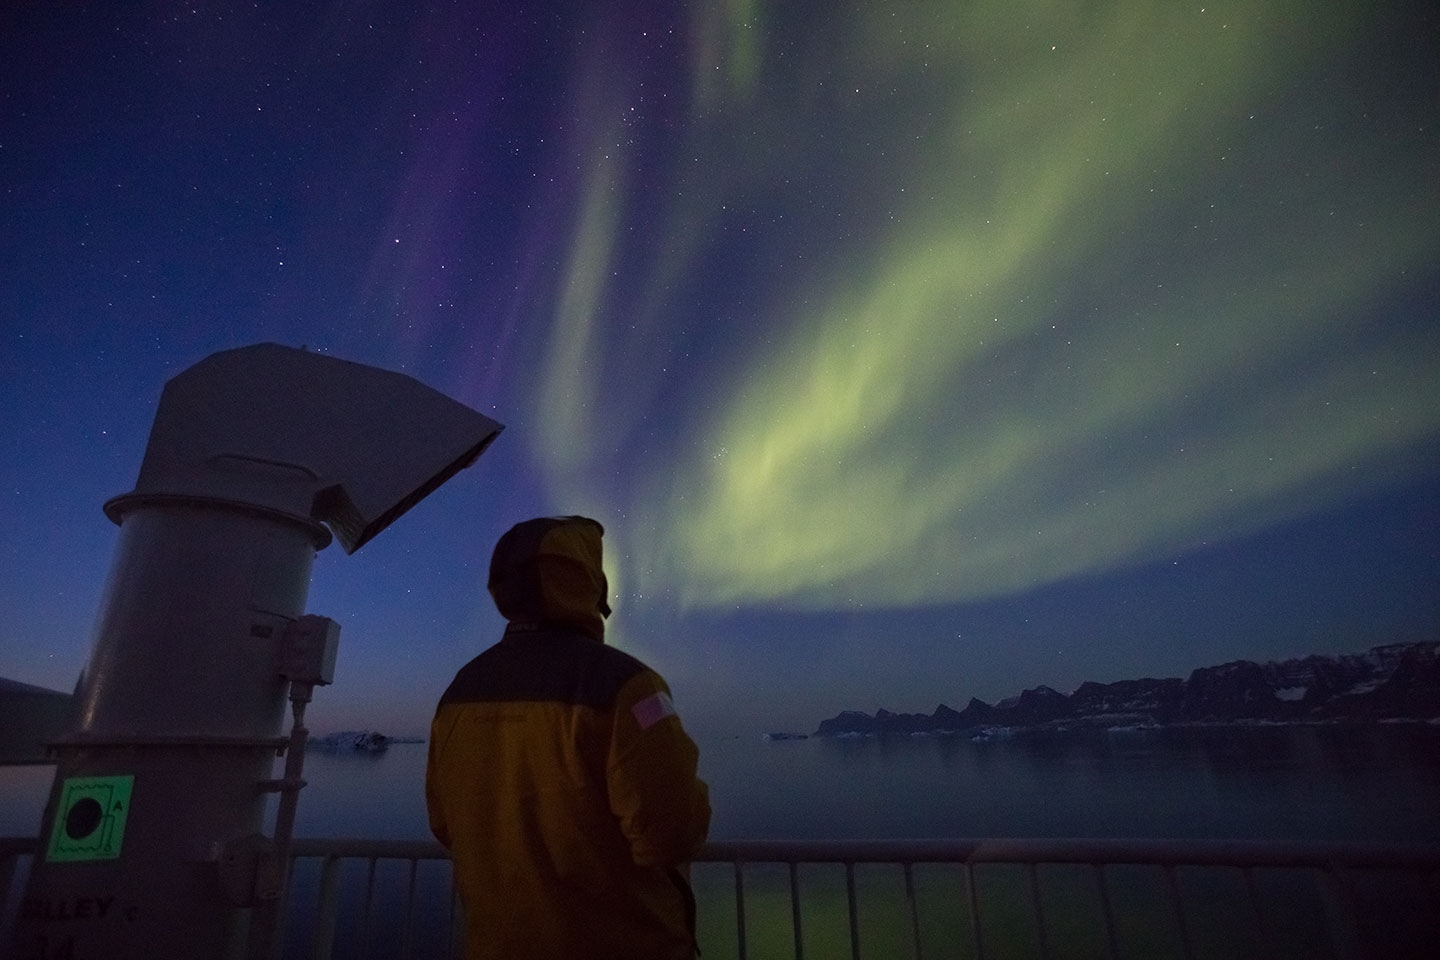 A Quark Expeditions guests watches with awe the Northern Lights from the deck of a polar vessel.